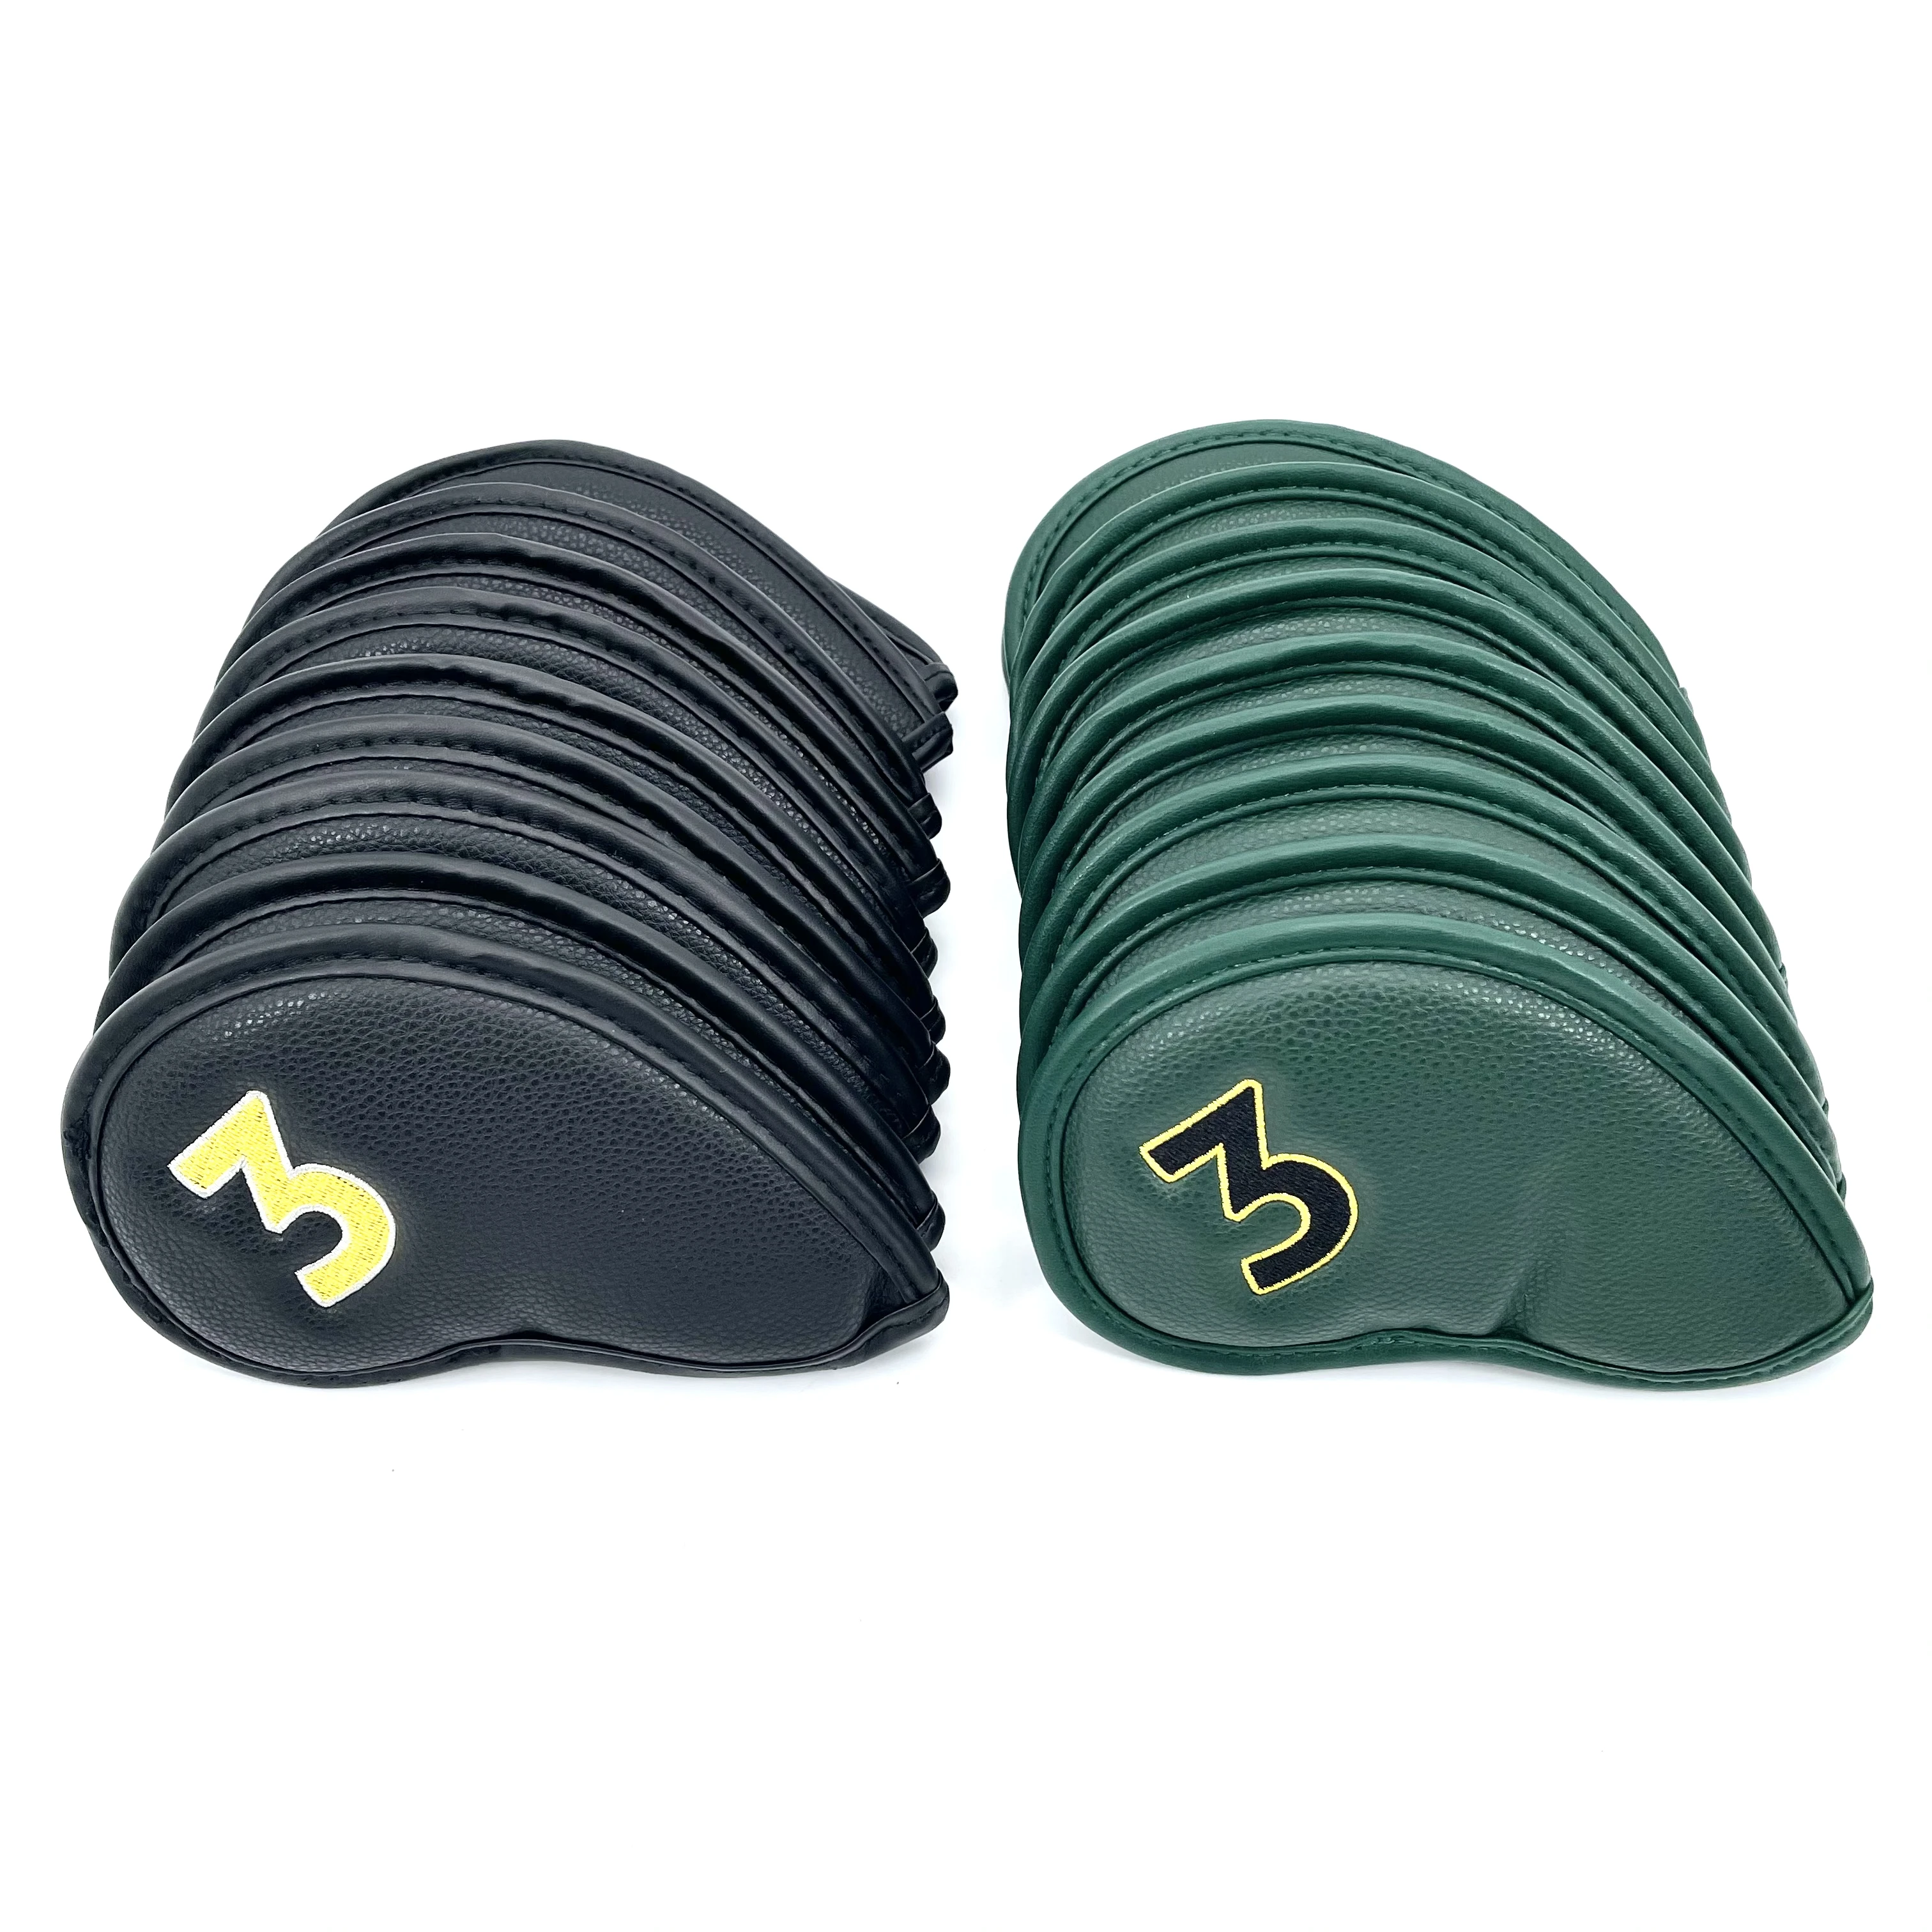 10pcs/set White/Black/Red/Green Optional PU Leather with number Embroidery Golf Club Iron Head Cover 3/4/5/6/7/8/9/A/P/S